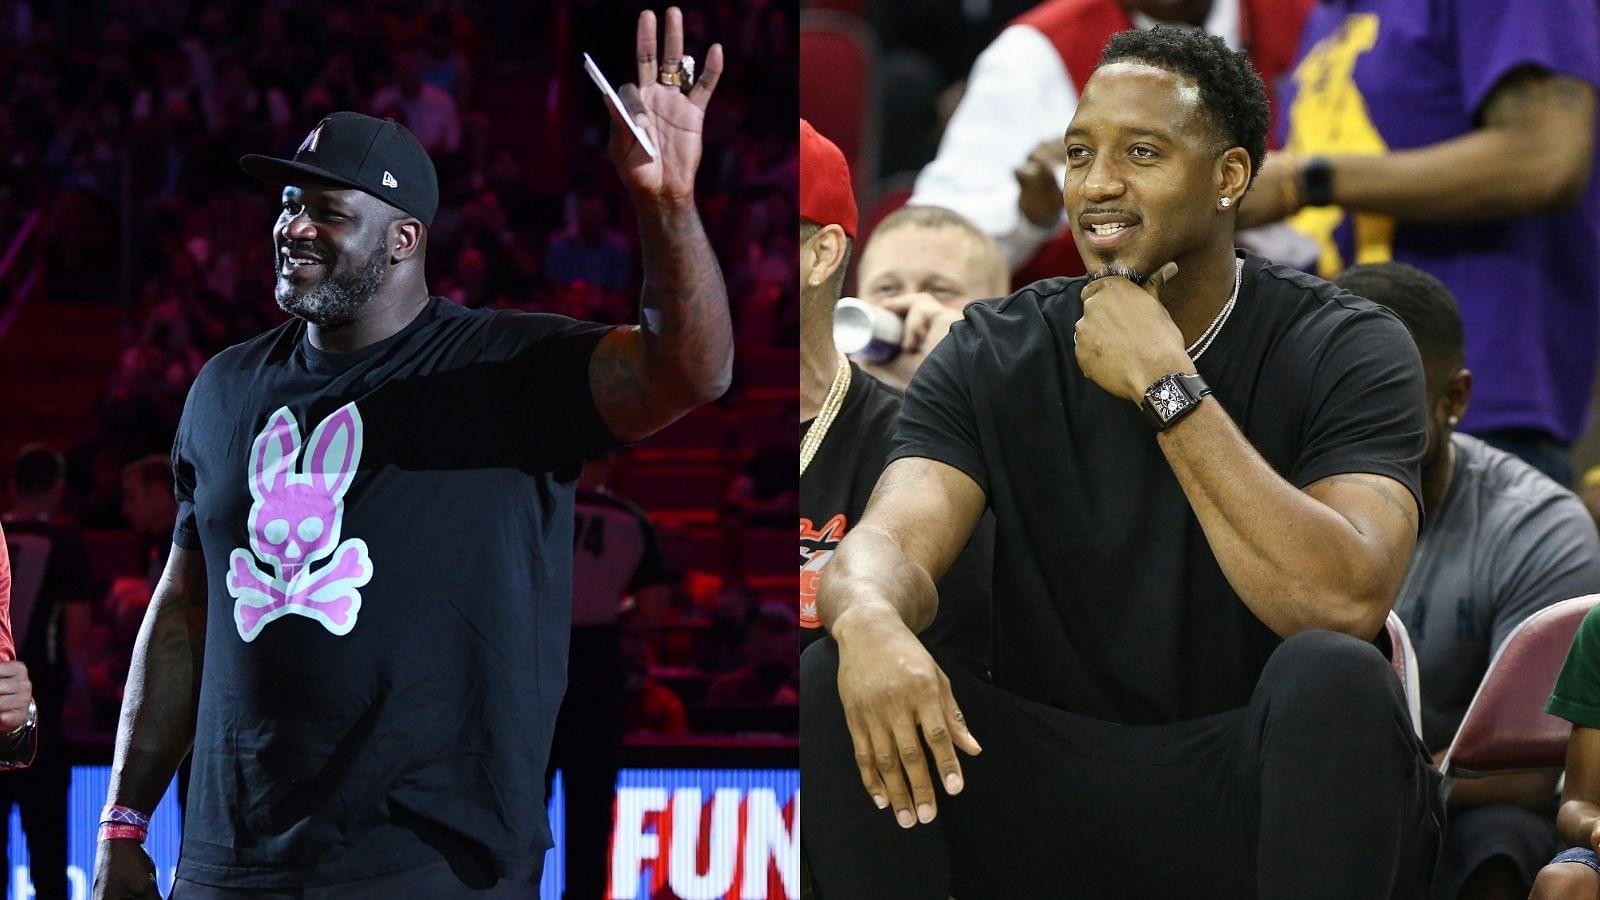 "Shaquille O'Neal calls Tracy McGrady SOFT": The Lakers legend hilariously roasts TMac after hearing his wish to get rid of his tattoos